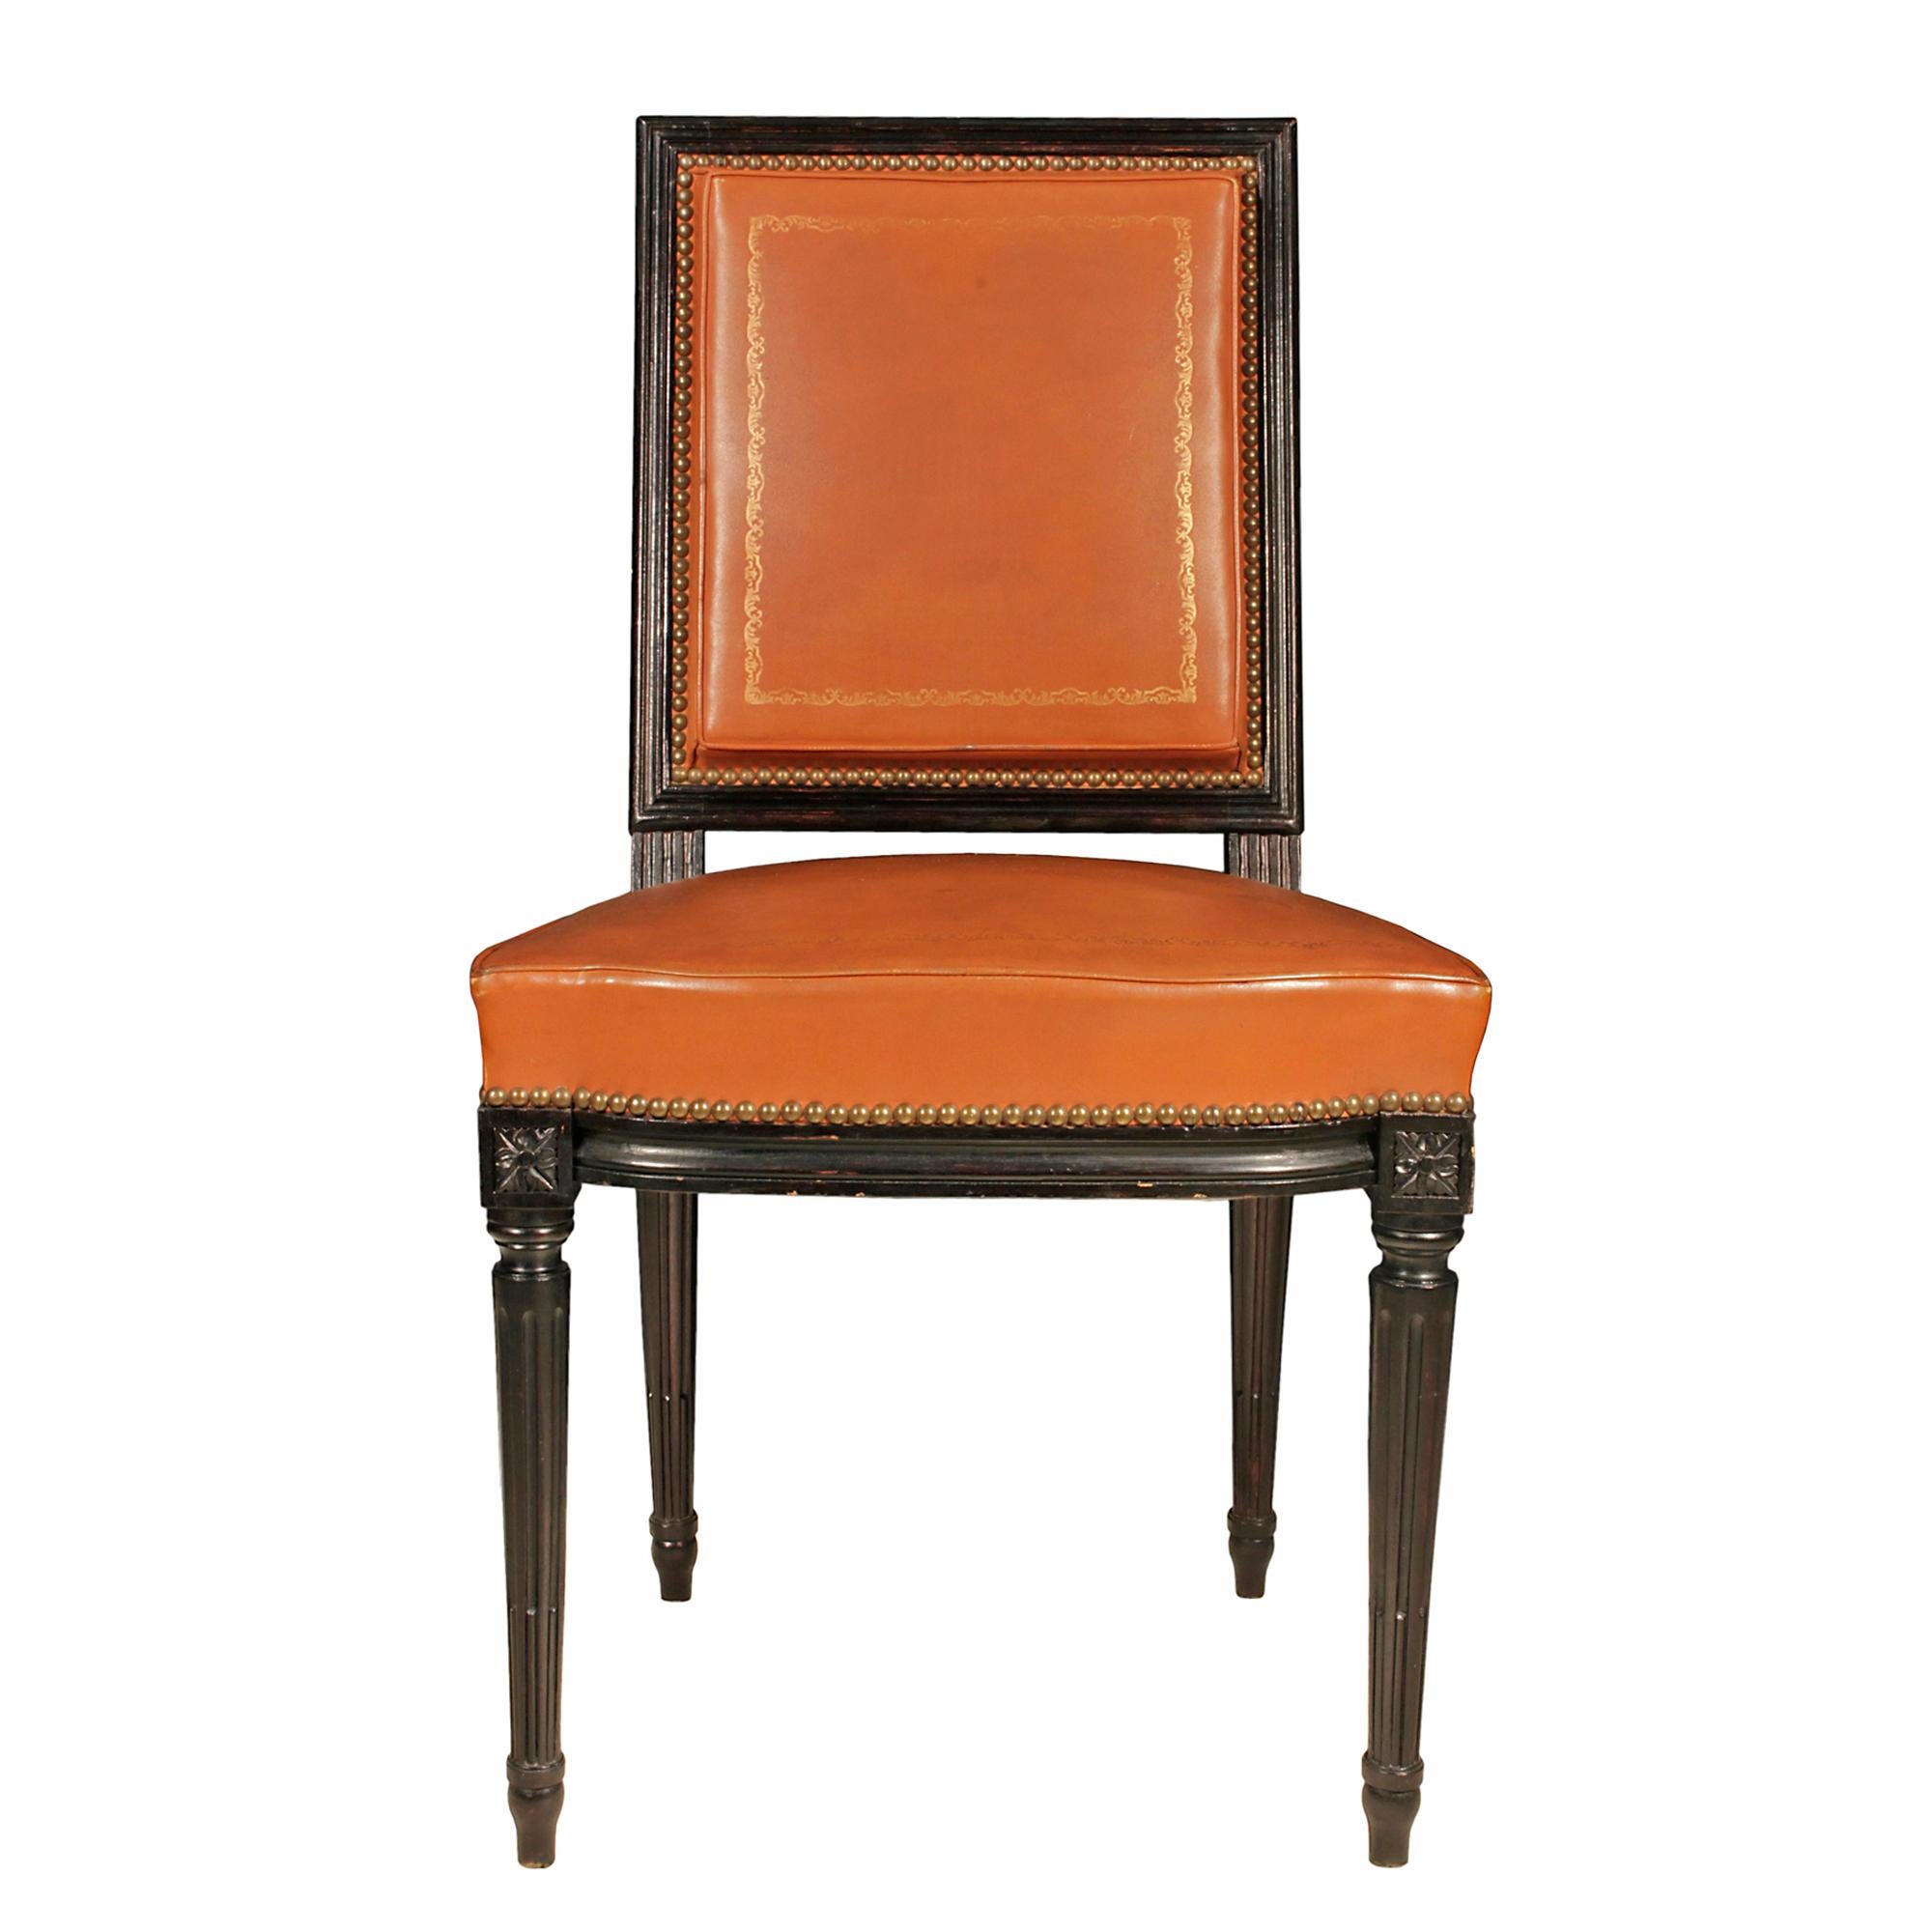 A wonderful set of six French Louis XVI st. turn of the century side chairs. Each ebonized fruitwood chair is raised on tapered reeded legs with rosette block tops. The molded apron continues onto the square back. All upholstered with a cognac gilt